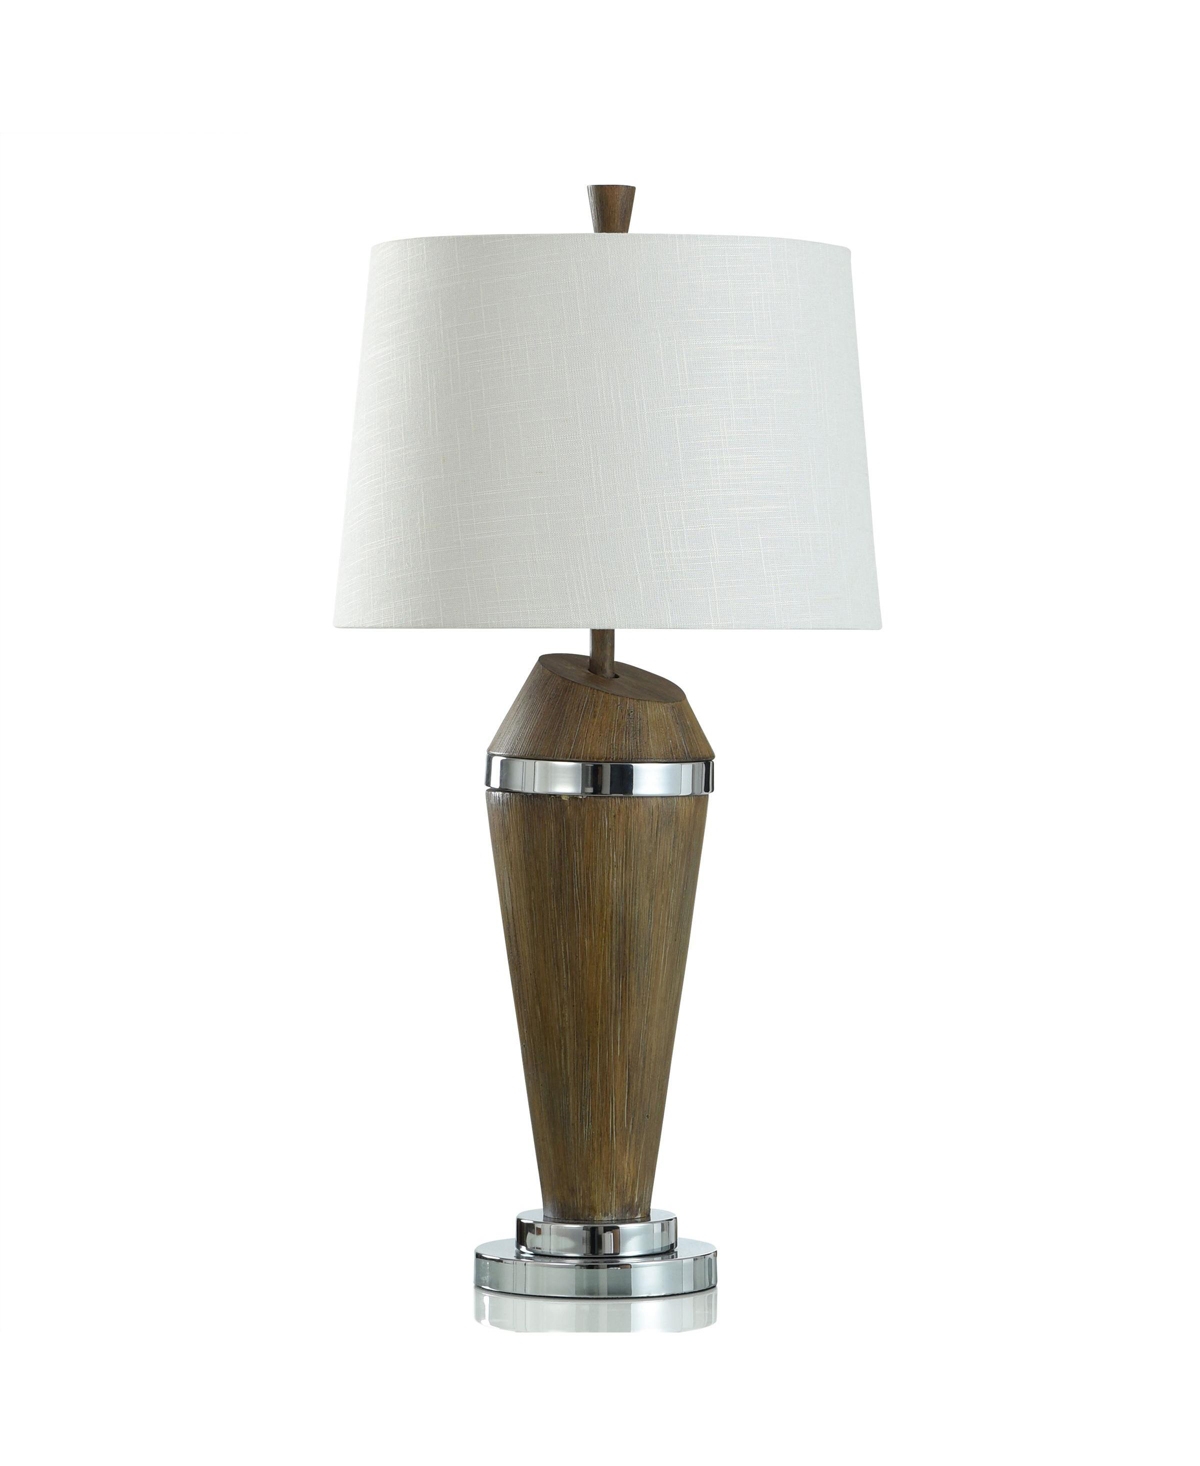 Stylecraft Home Collection 32.5" Danrun Mid Century Modern Table Lamp In Brushed Steel,faux Wood